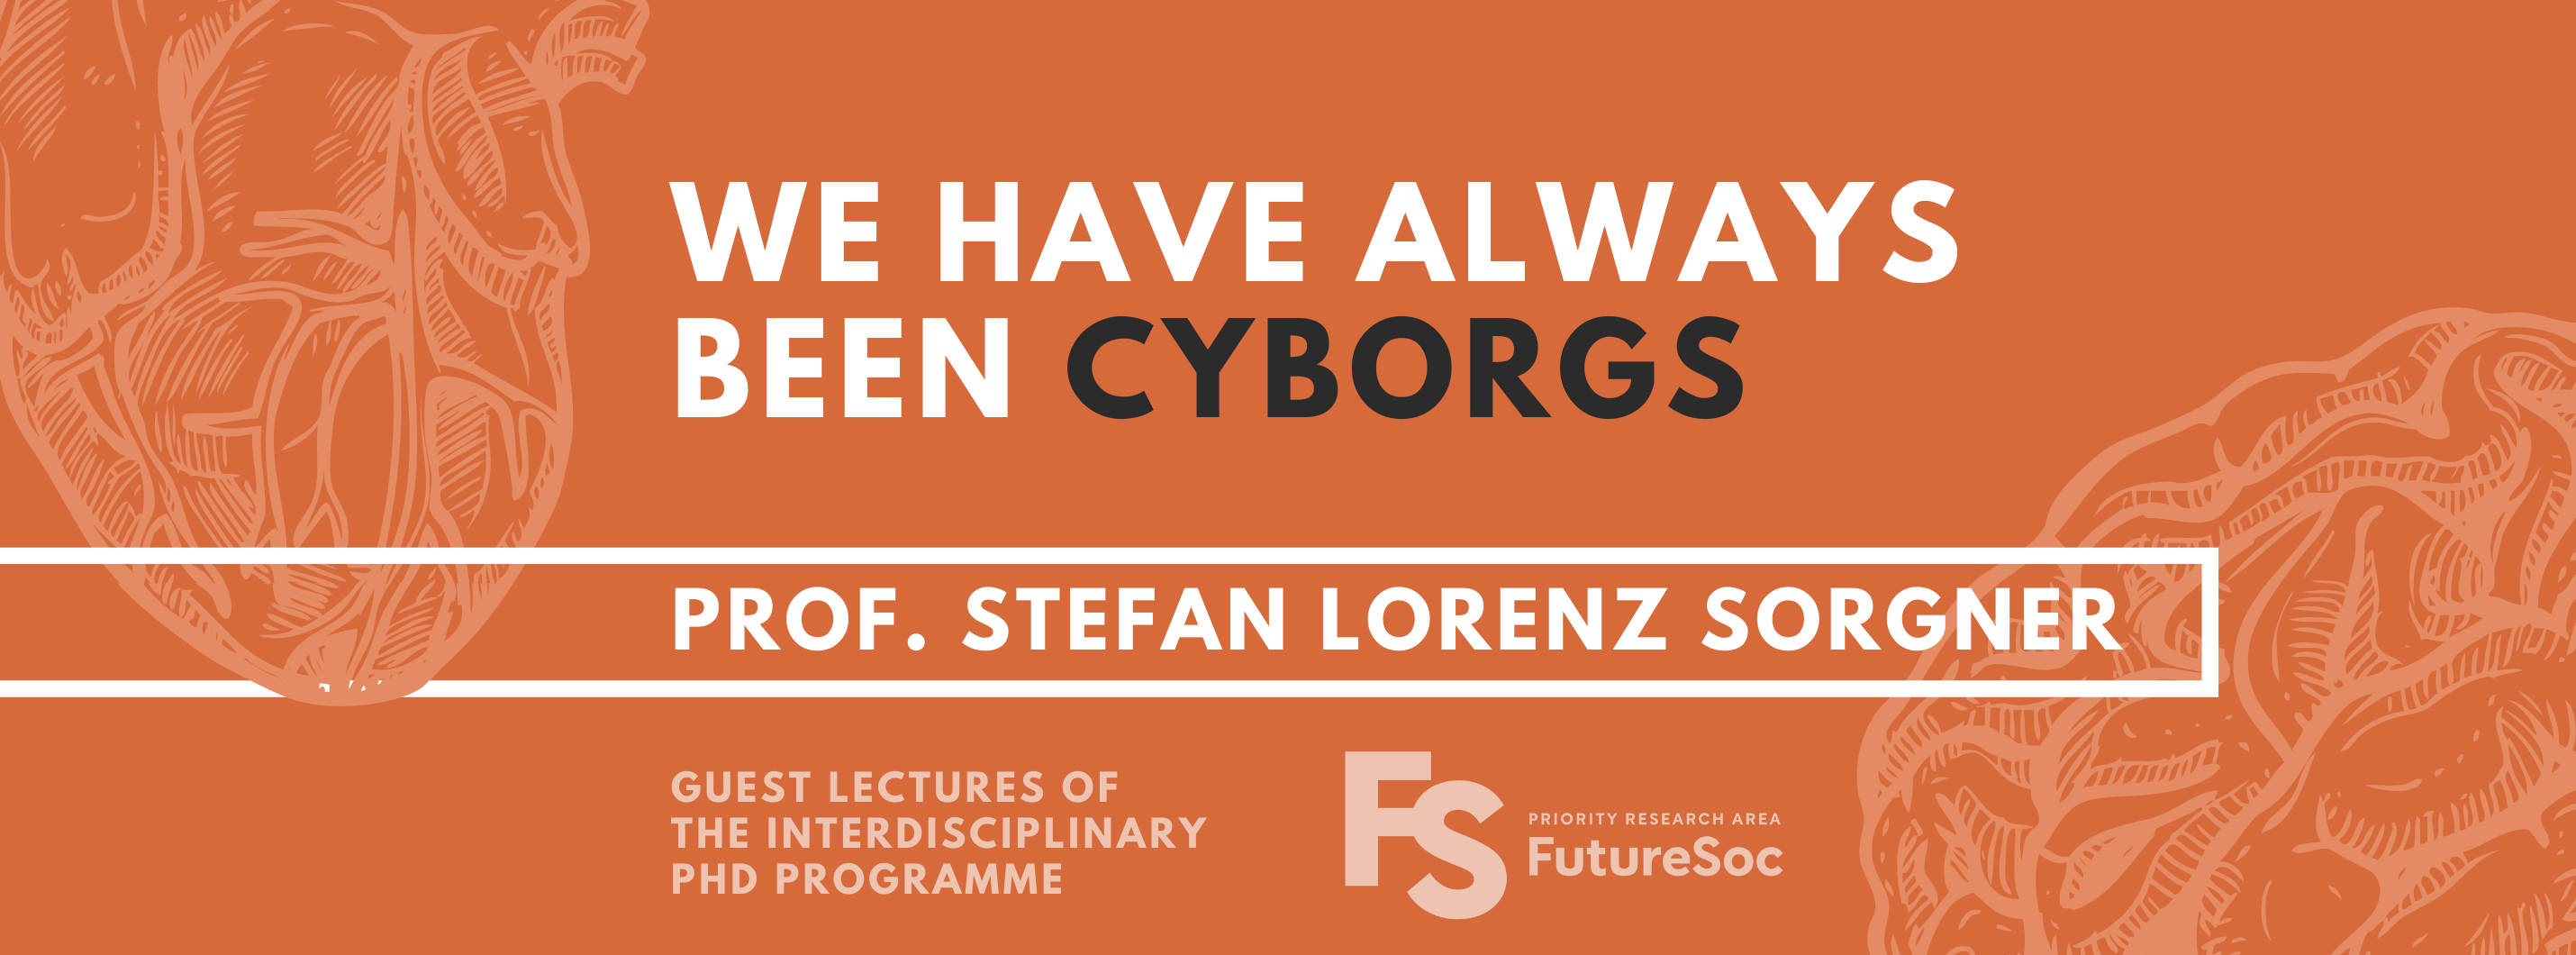 Text: "We have always been cyborgs", prof. Stefan Lorenz Sorgner. Guest lectures of the Interdisciplinary PhD Programme. Logo: Priority Research Area FutureSoc. Background: orange with graphics of a heart and a brain.